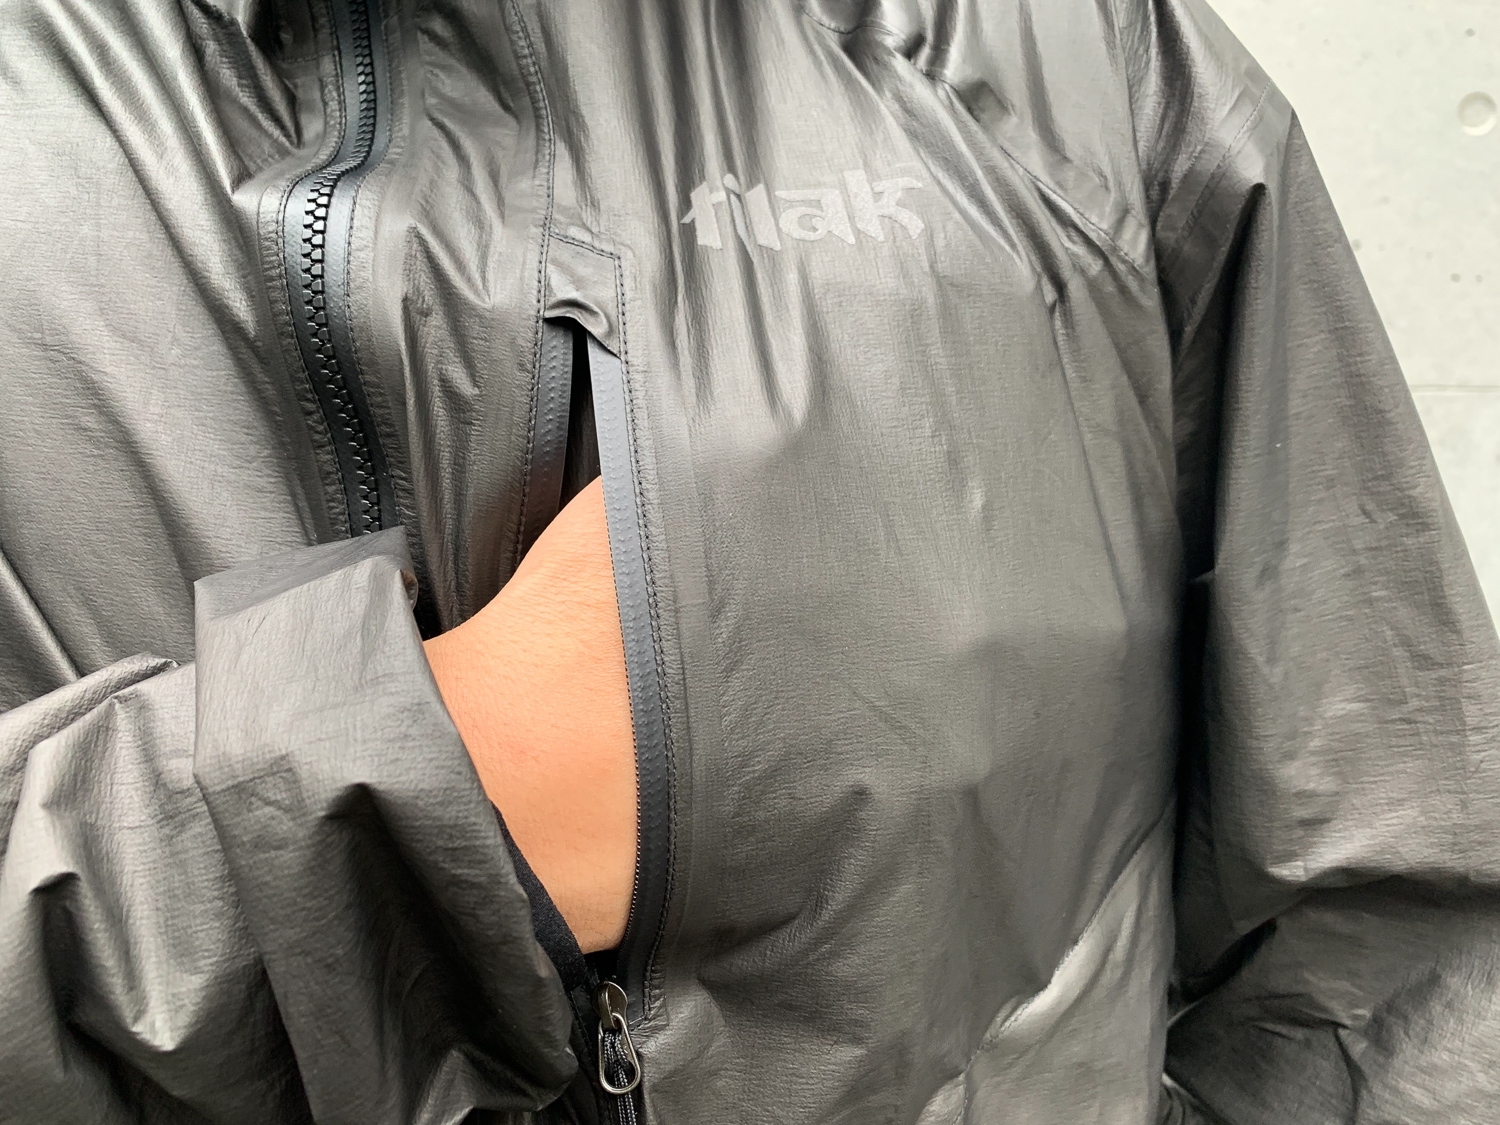 A packable rain jacket with premium materials.